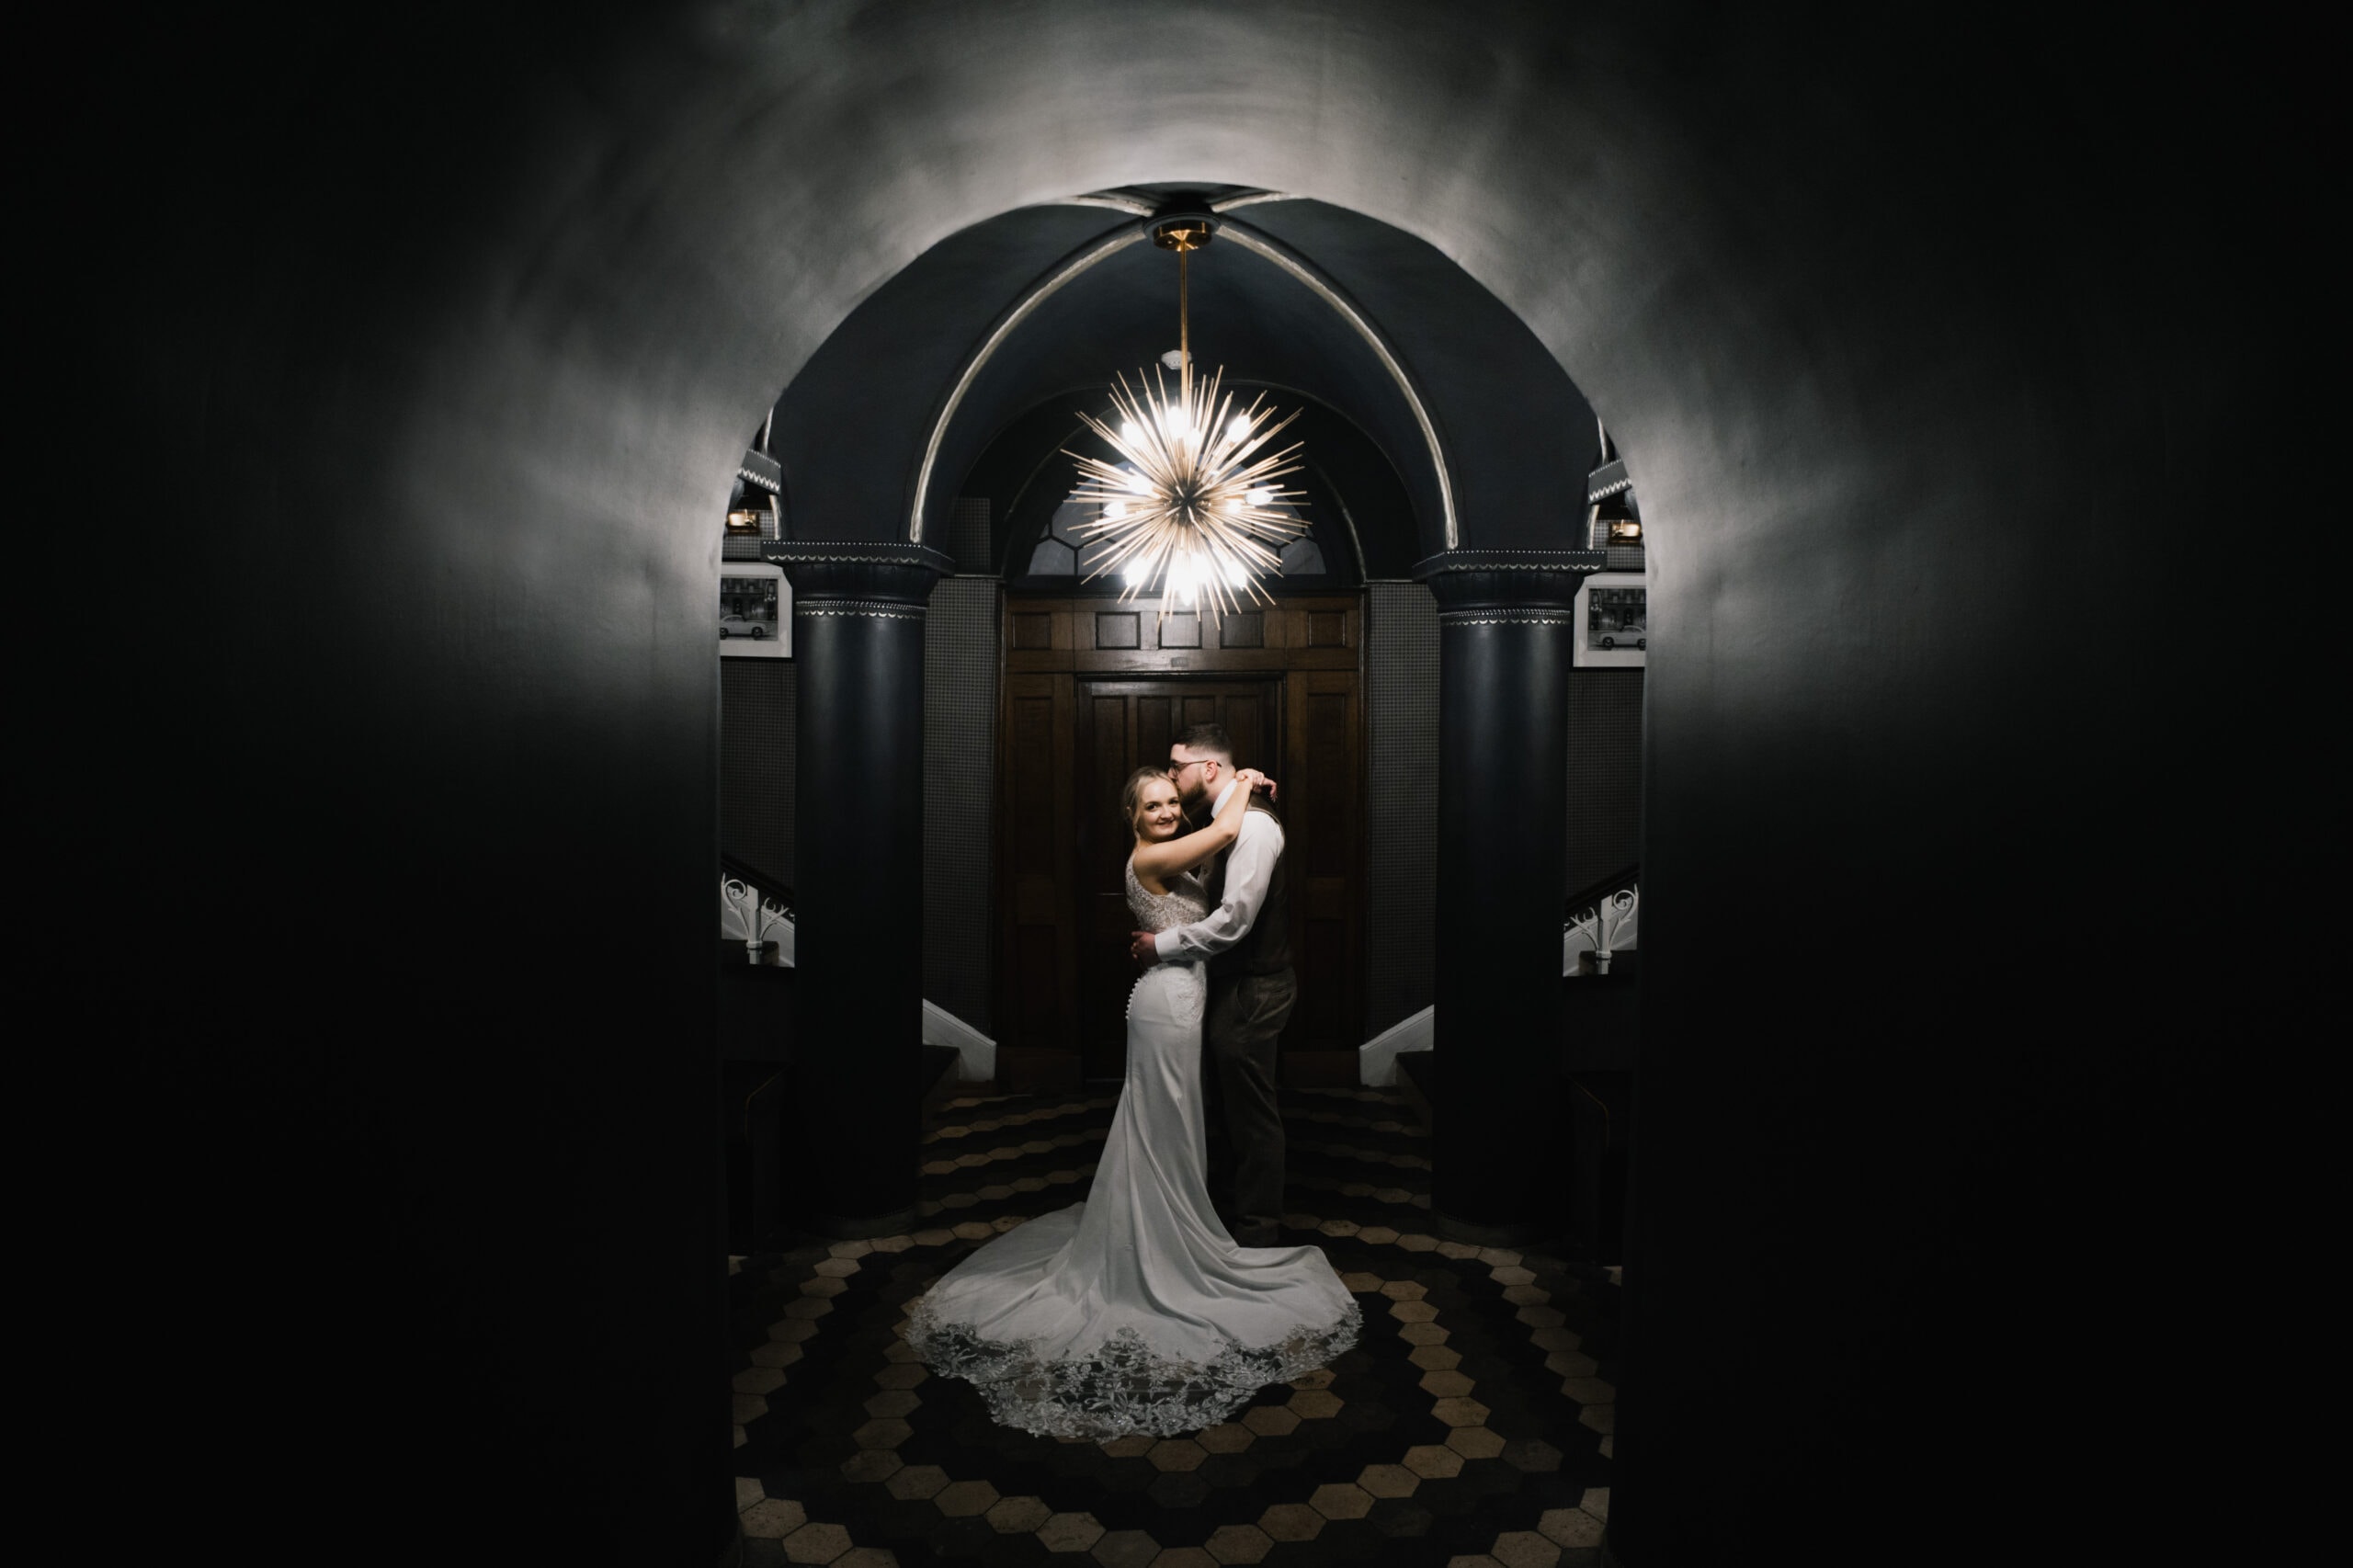 A newlywed couple embraces under a striking light fixture in a dark, arched hallway with a patterned floor, creating a dramatic and romantic scene.